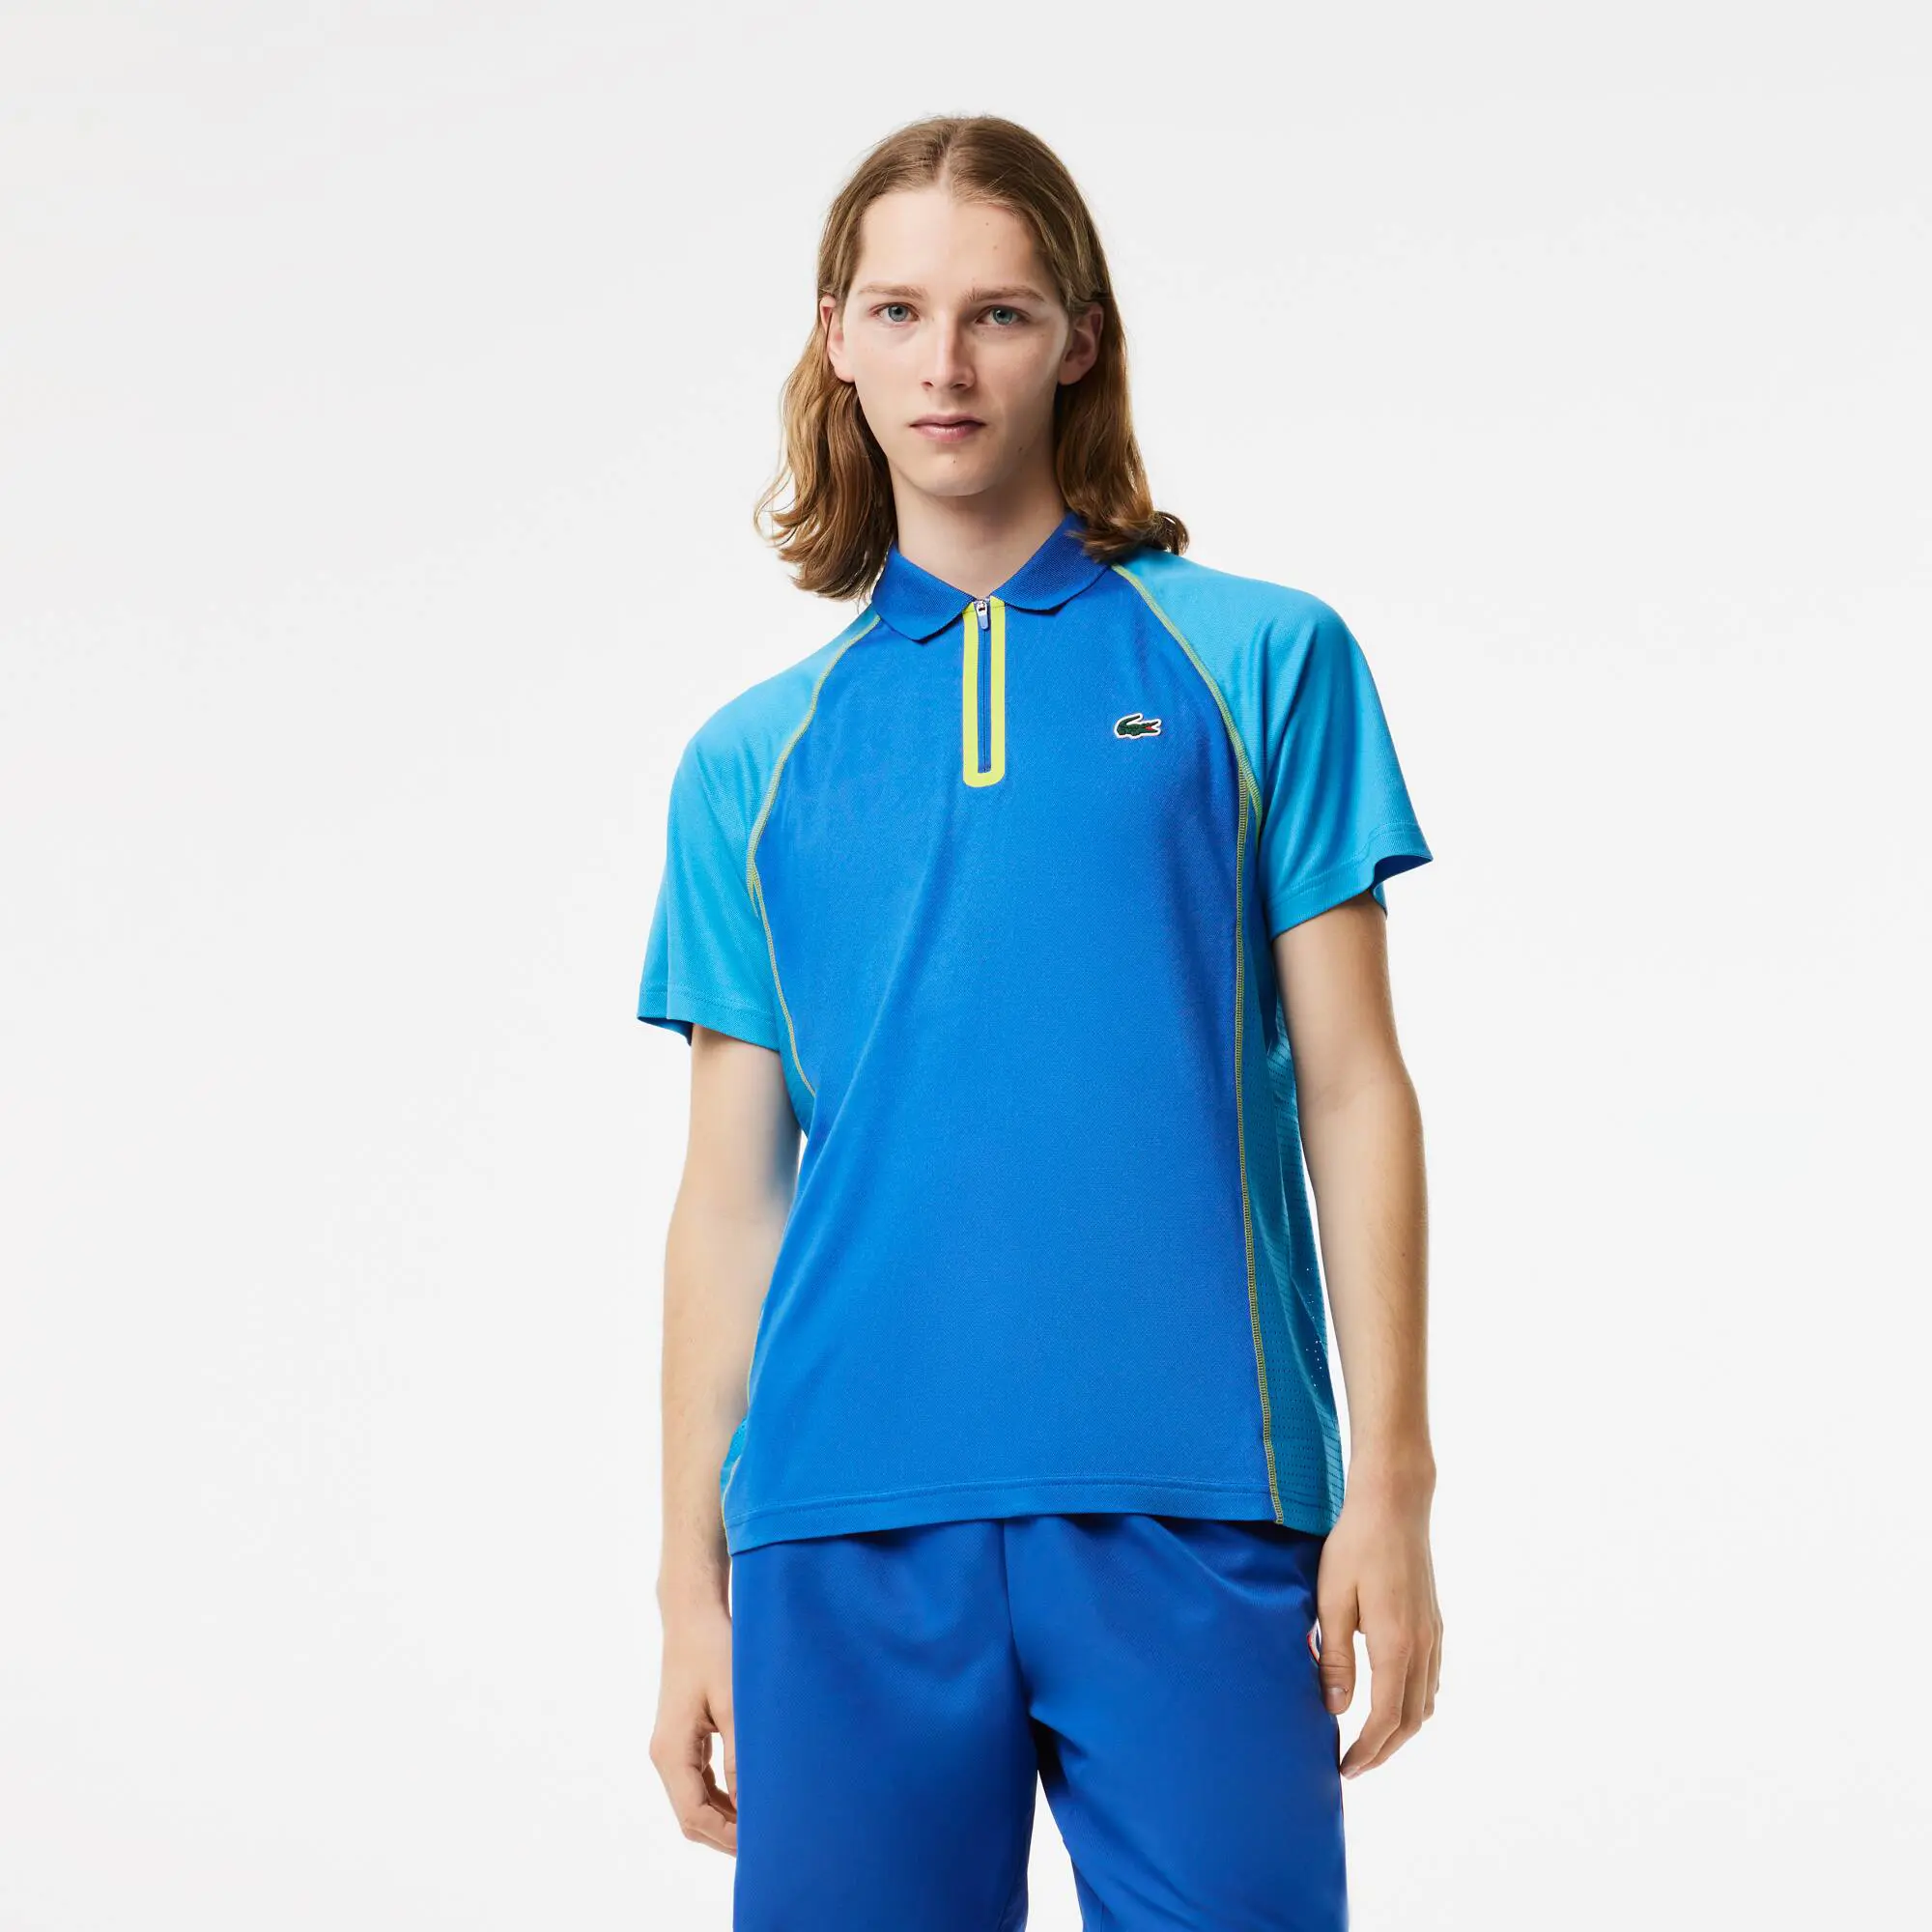 Lacoste Men’s Lacoste Tennis Recycled Polyester Polo Shirt with Ultra-Dry Technology. 1